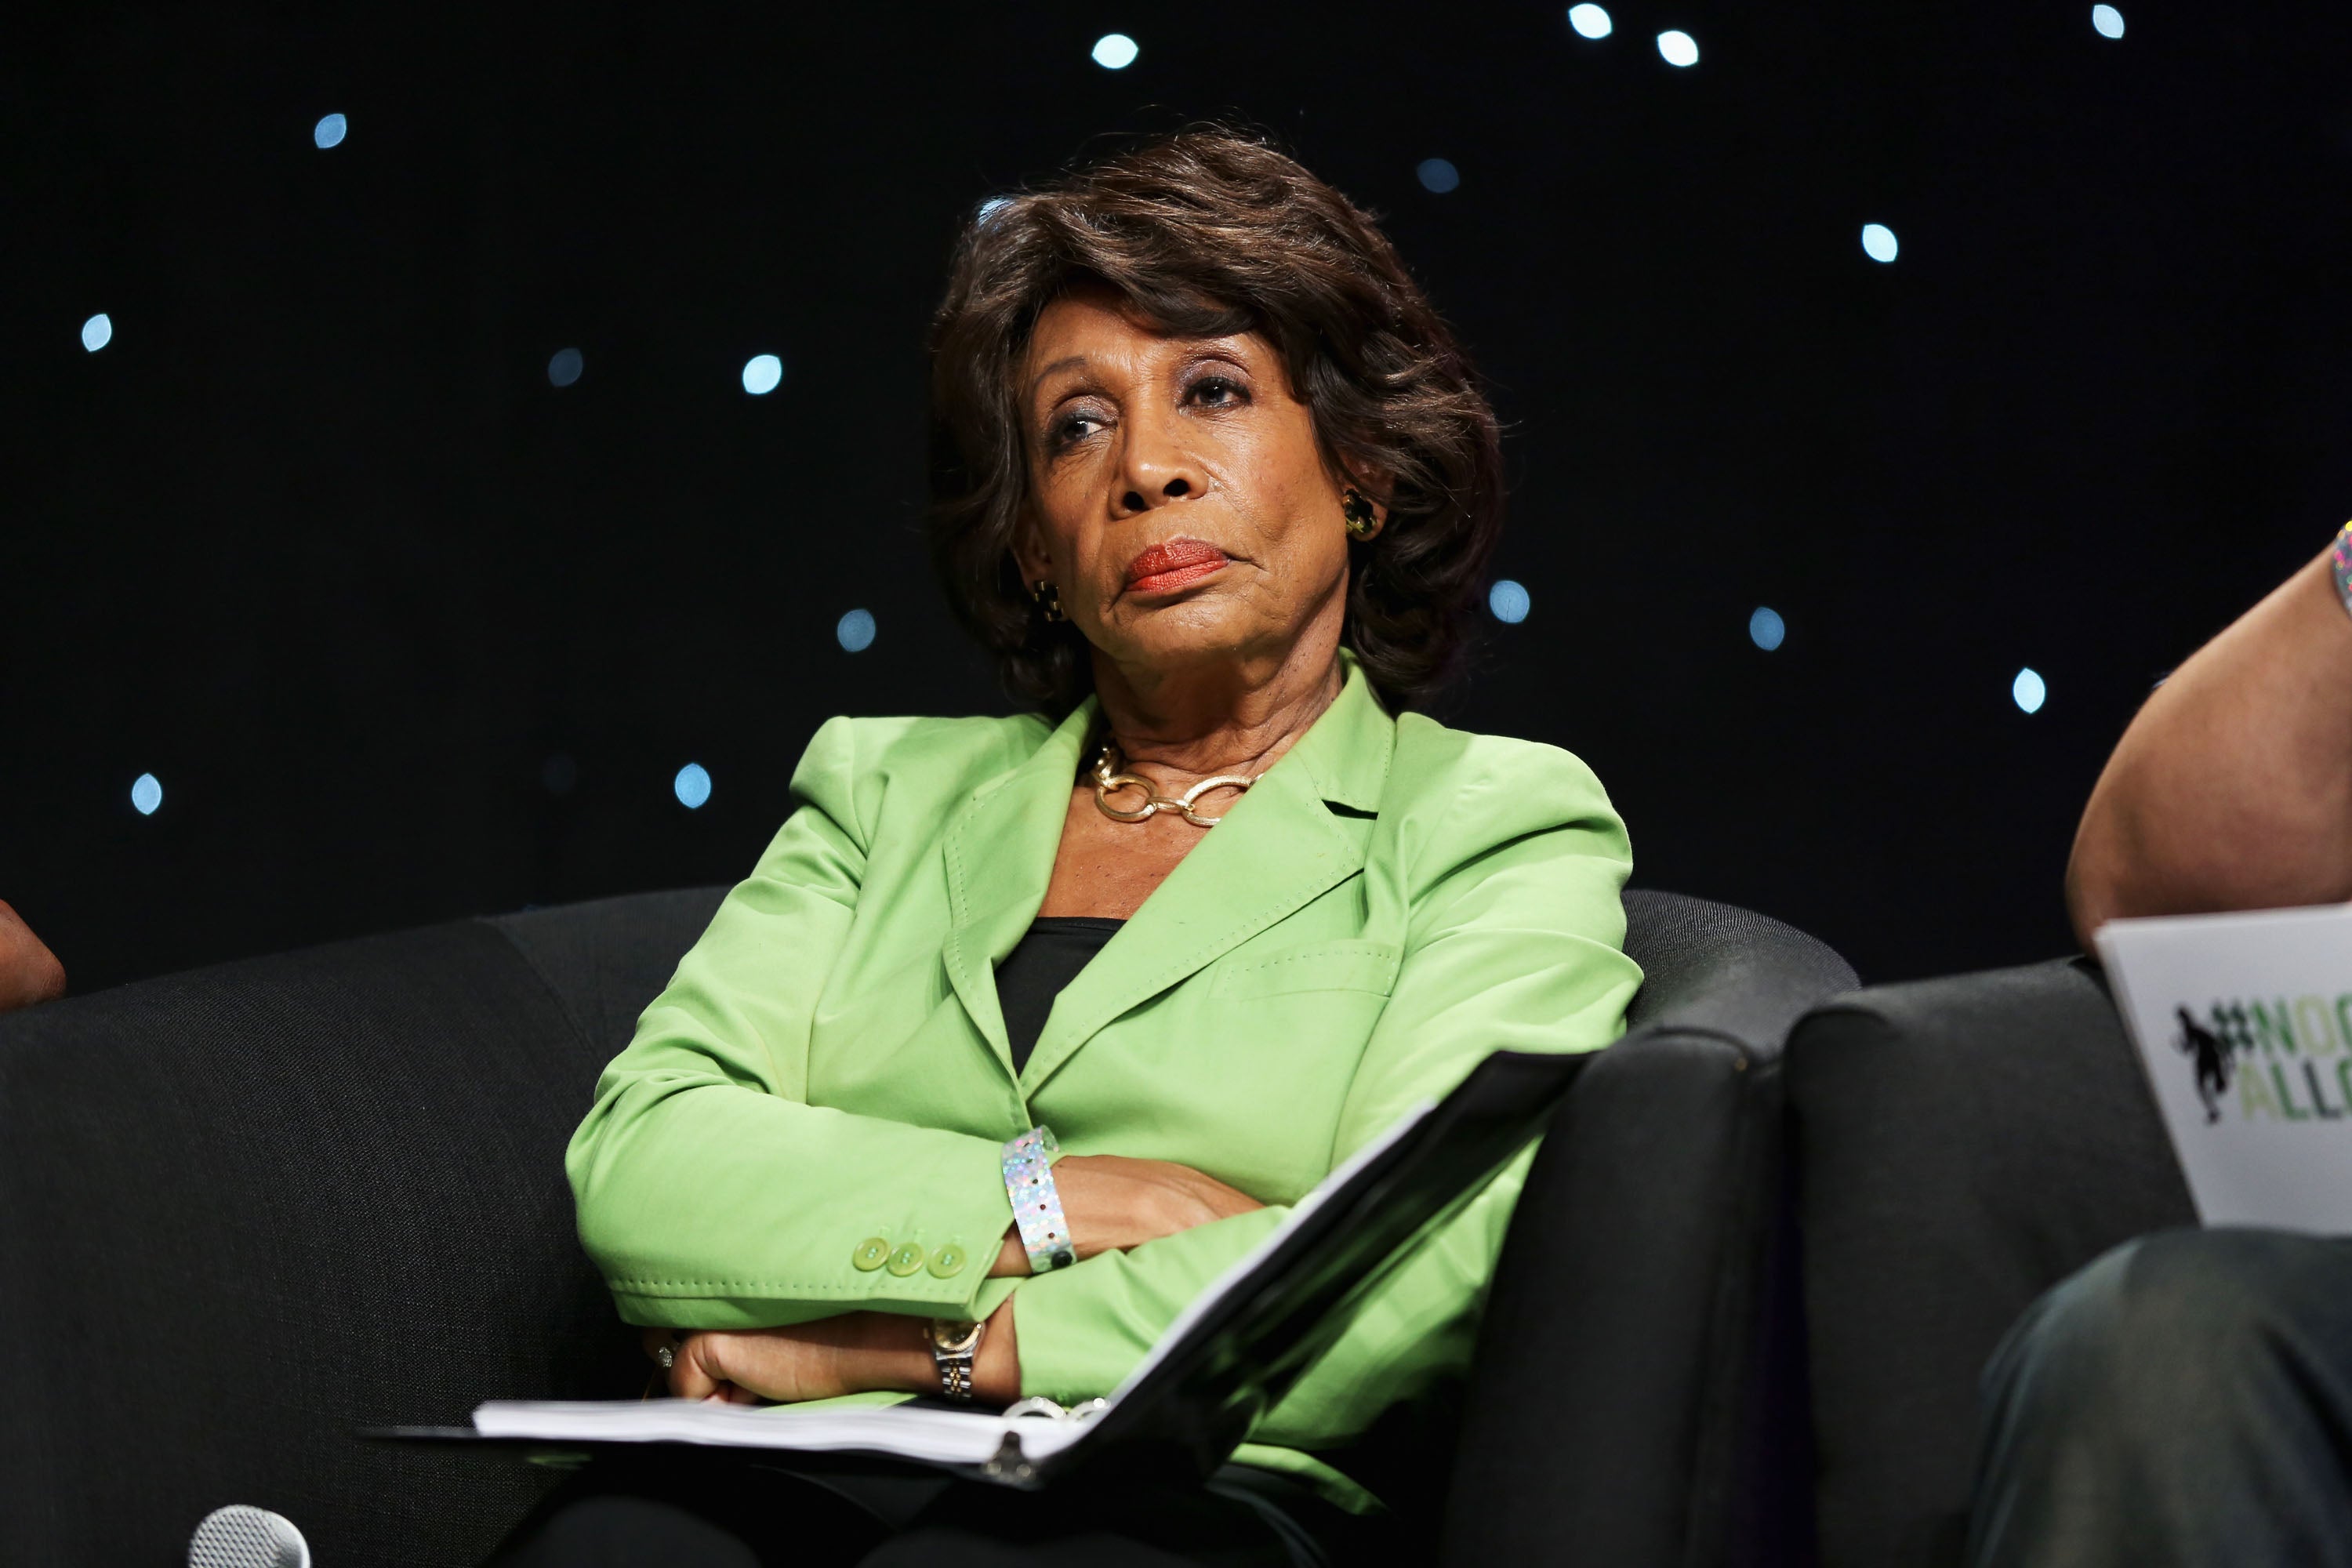 Rep. Maxine Waters Claimed Her ‘Told You So’ Moment After Comey Hearings